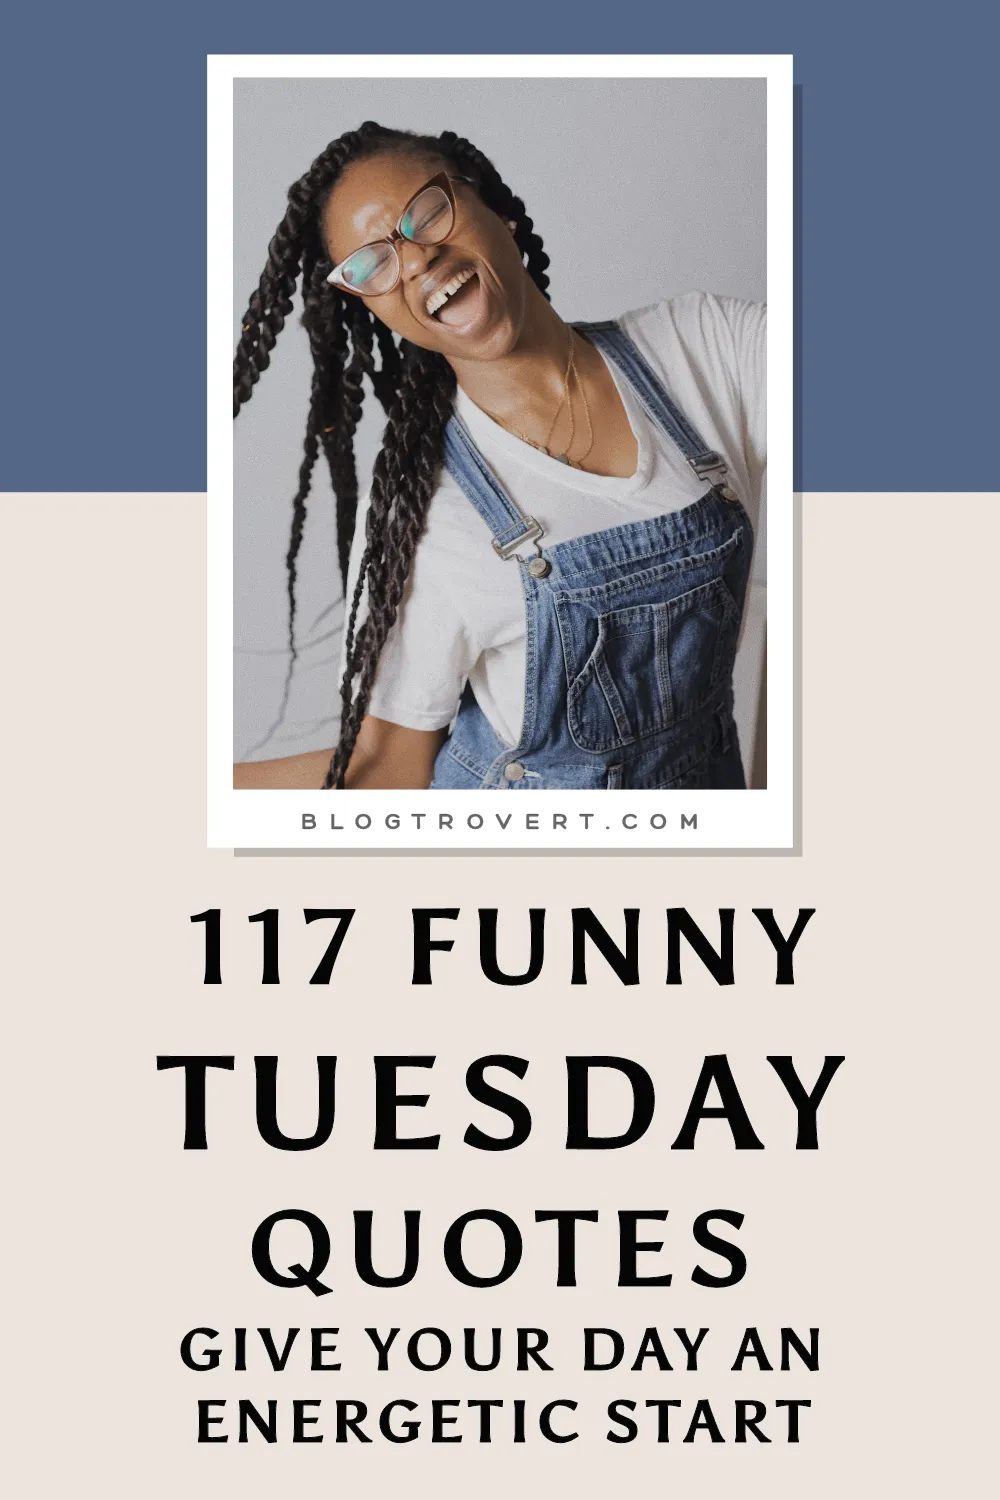 117 Funny Tuesday Quotes to Brighten Your Day 5